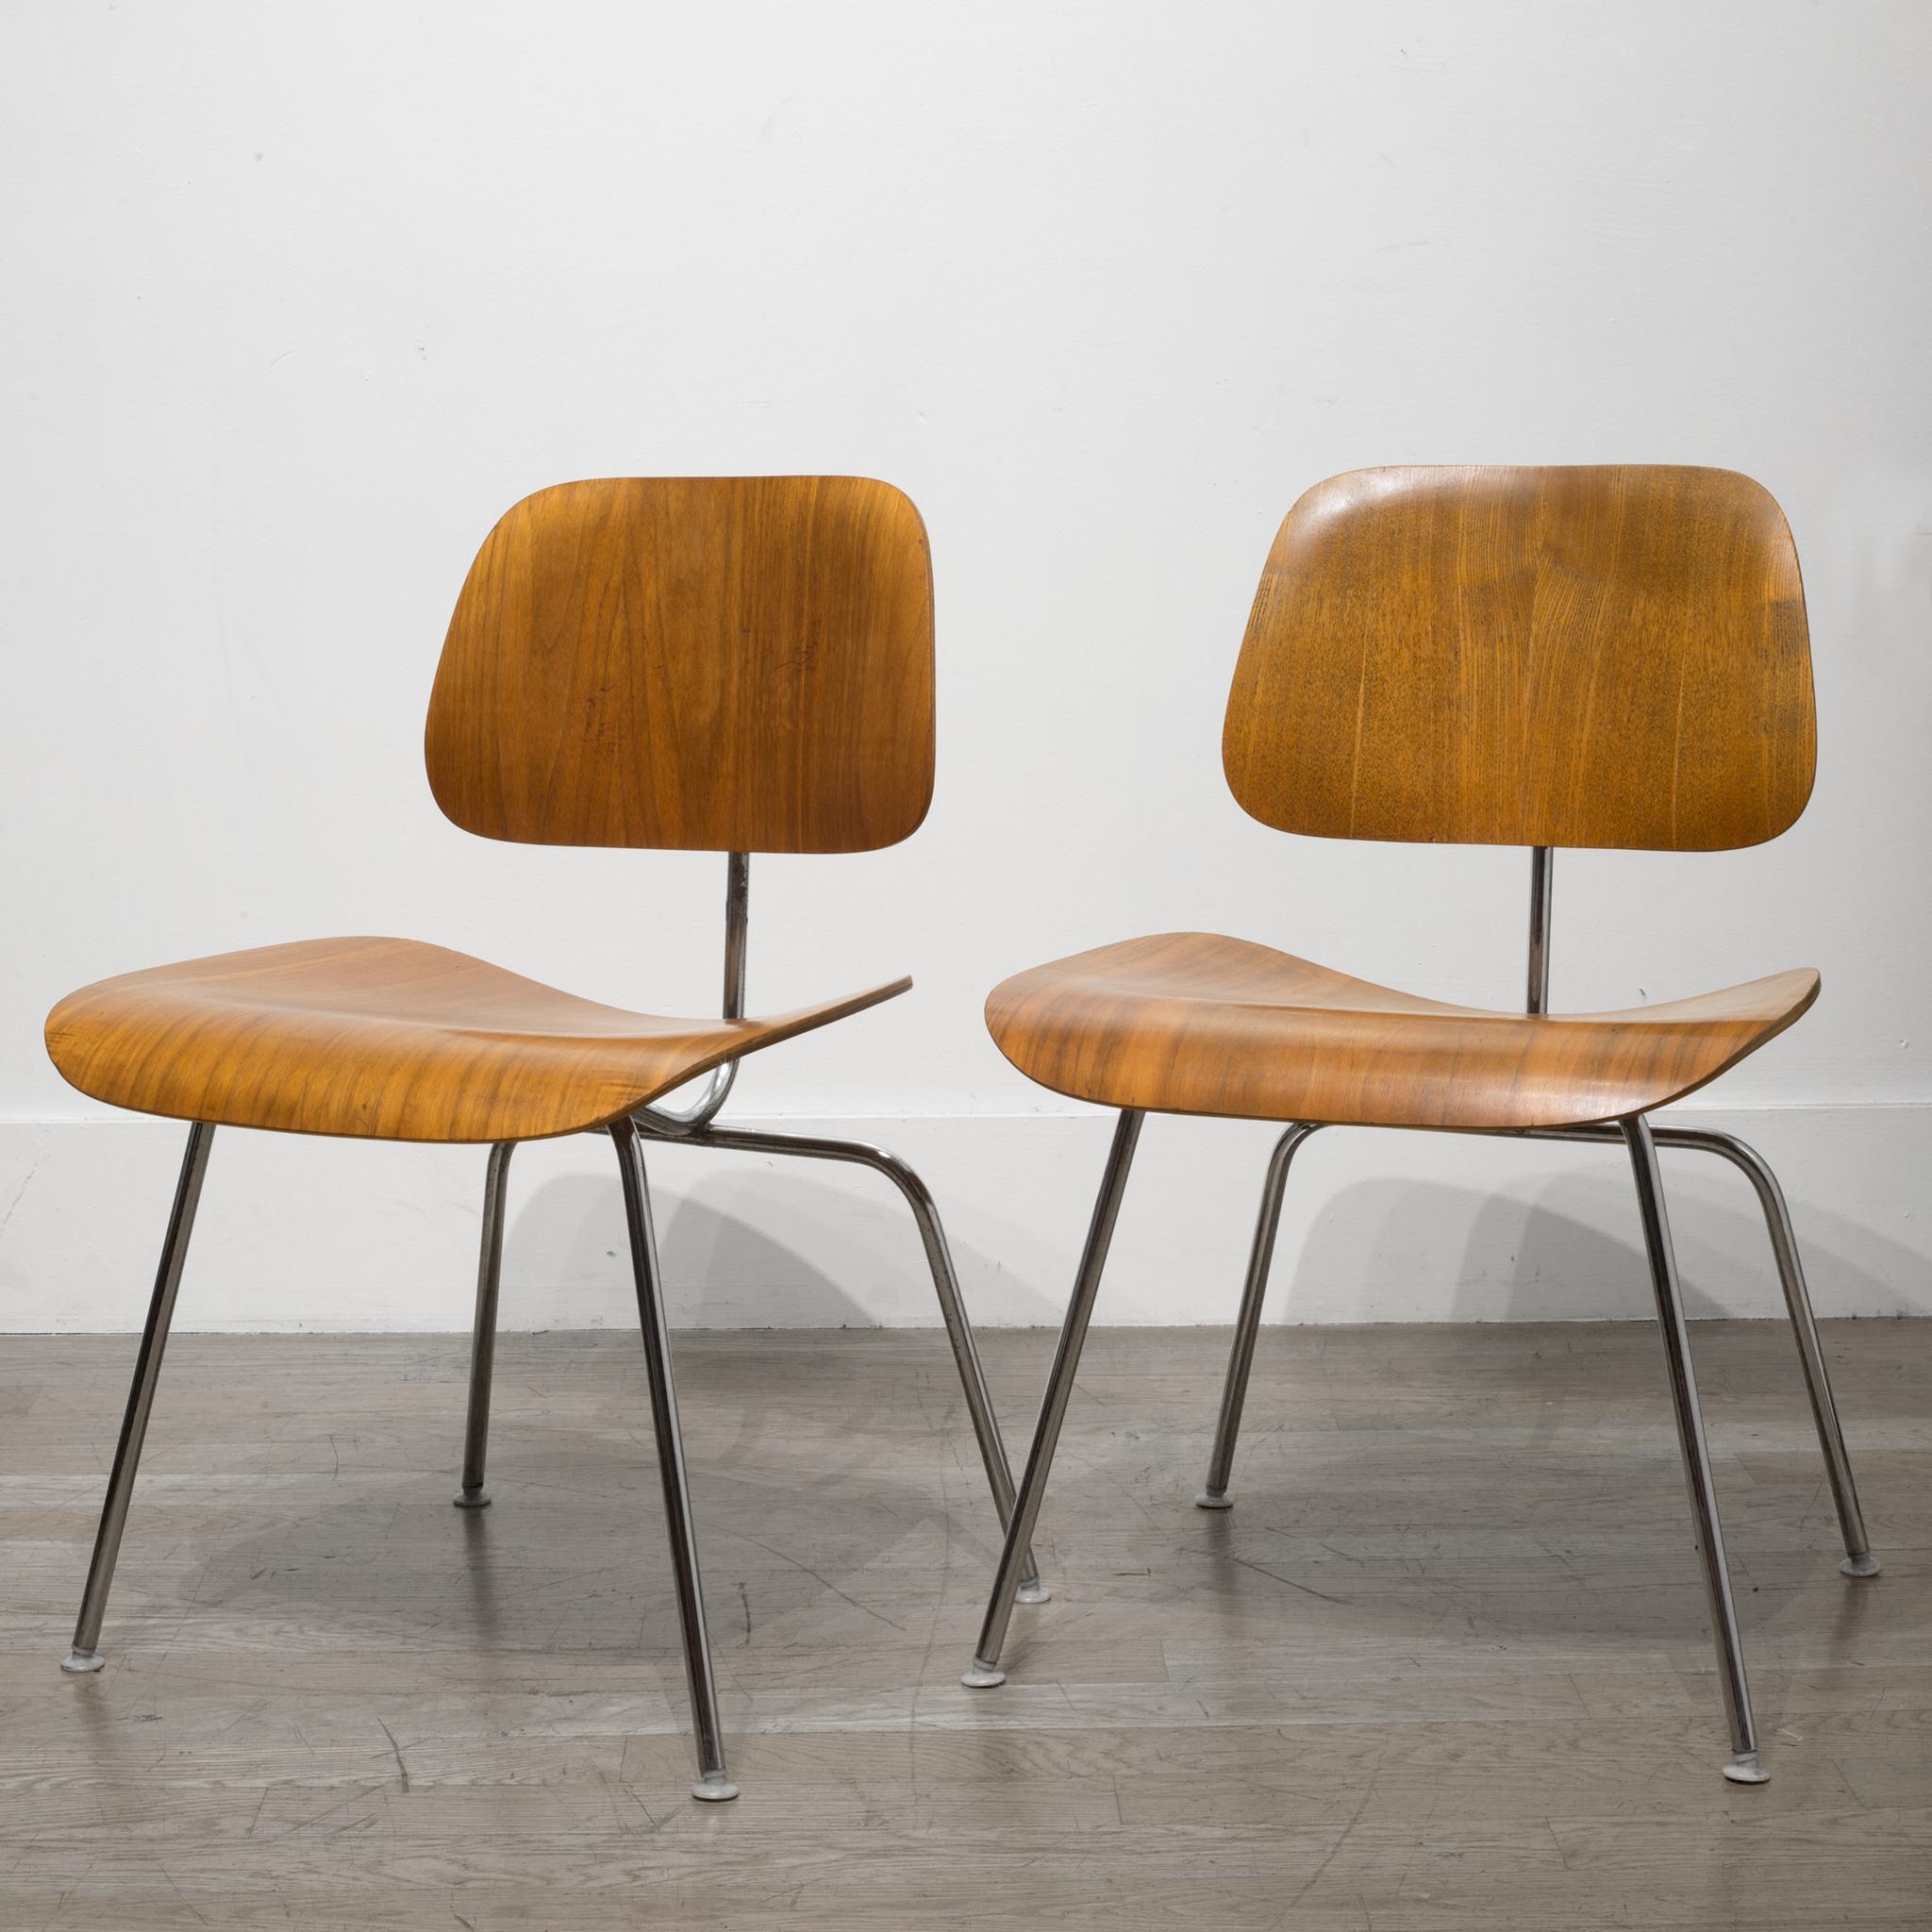 About

This is a set of early Herman Miller DCM (dining chair metal) with walnut veneer seat and back with metal legs. These chairs are fabricated from molded plywood seats and backs attached to a metal base, creating a minimal silhouette. The grain